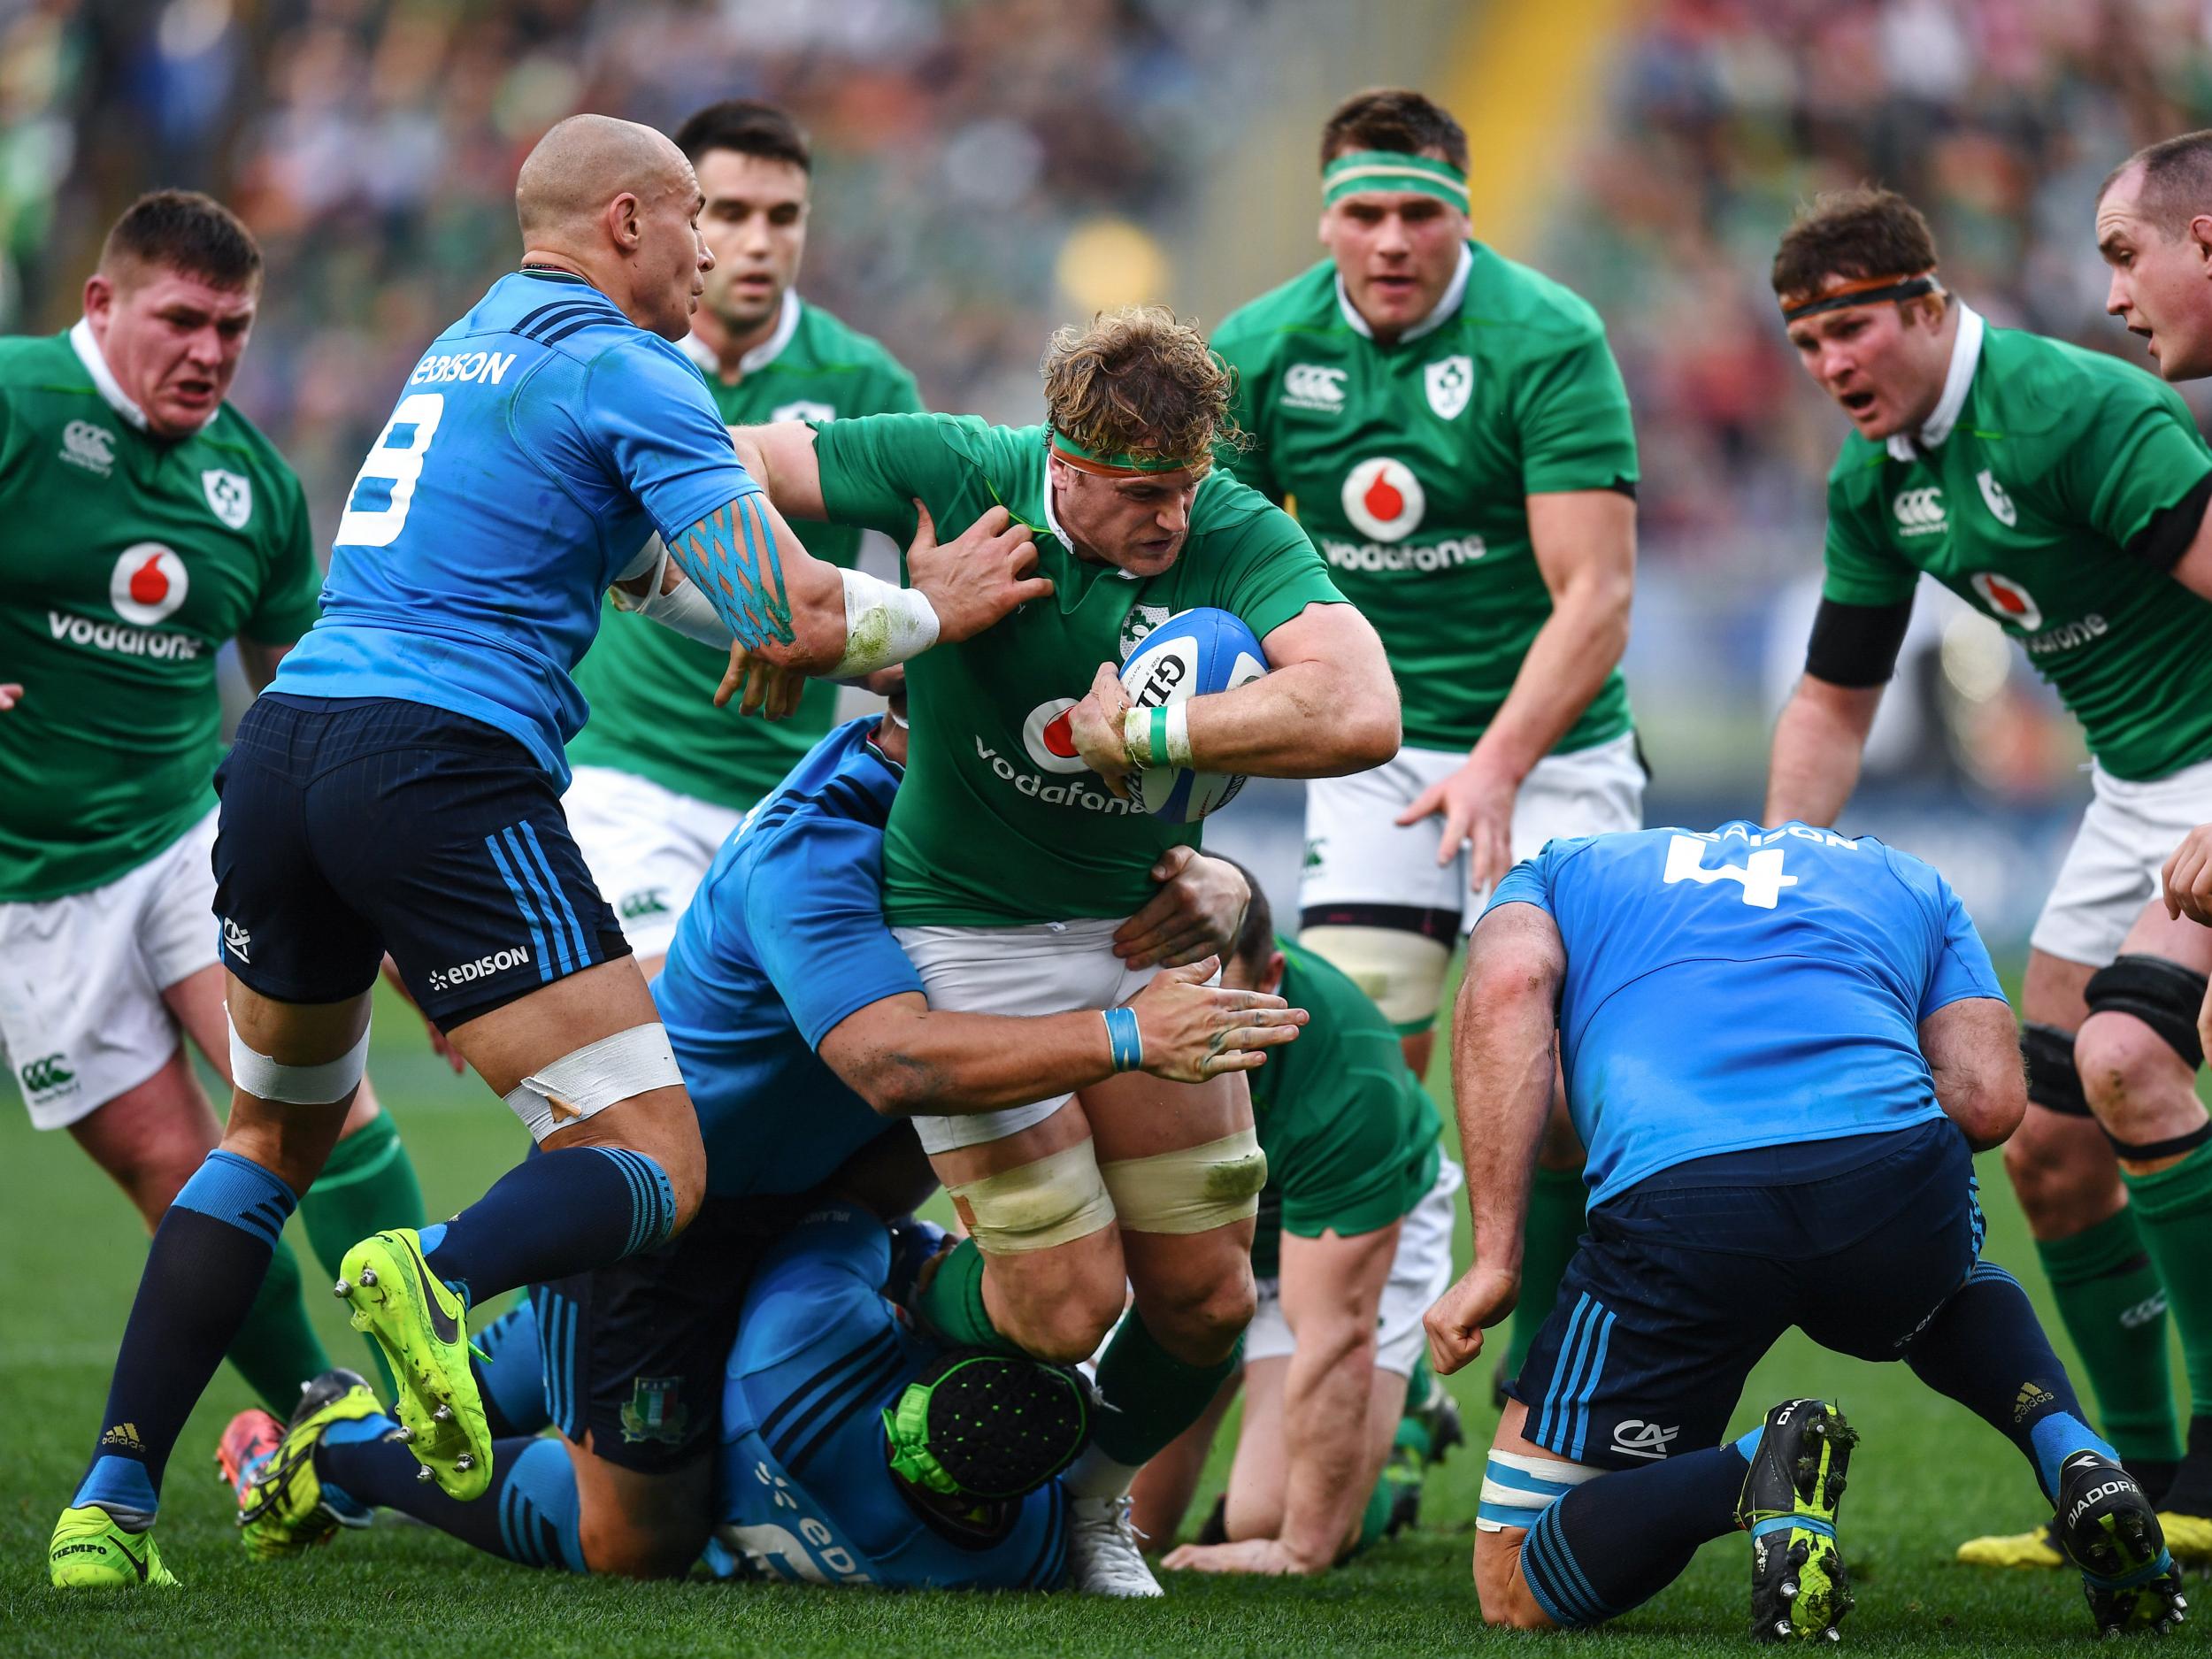 Heaslip captained Ireland in the absence of the unwell Rory Best